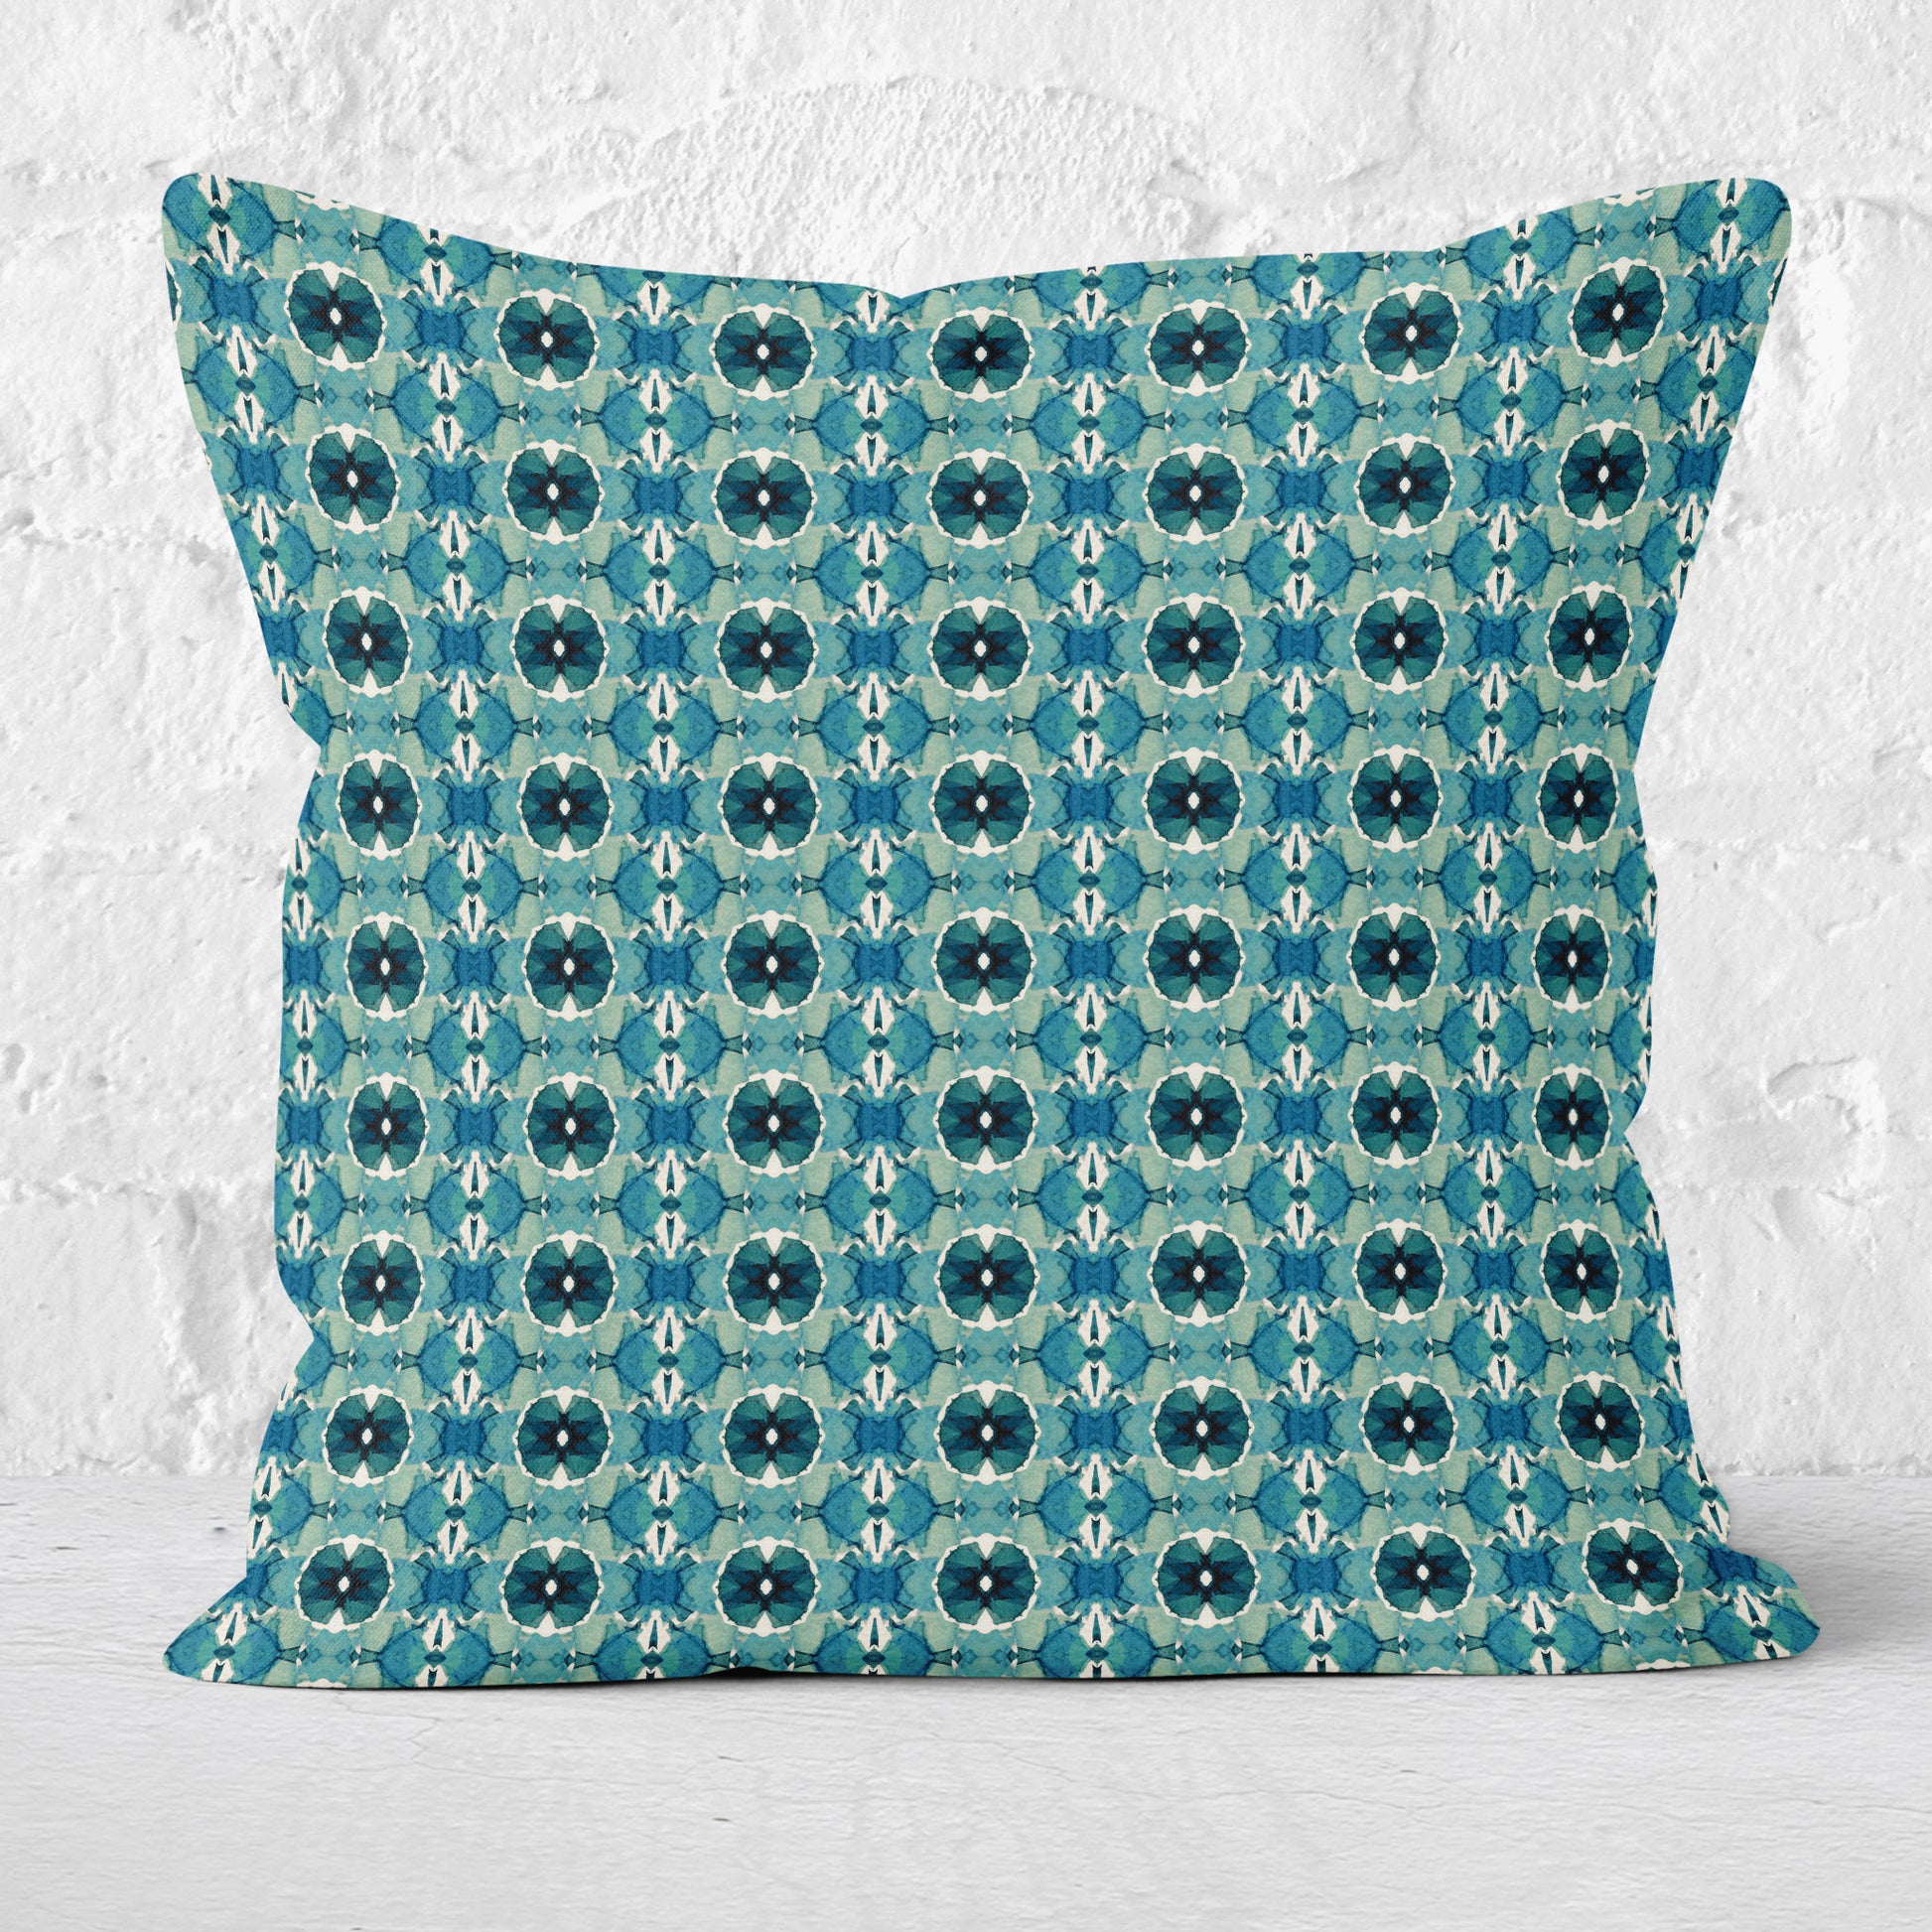 Throw pillow featuring hand-painted geometric pattern in teal with a white brick wall in the background